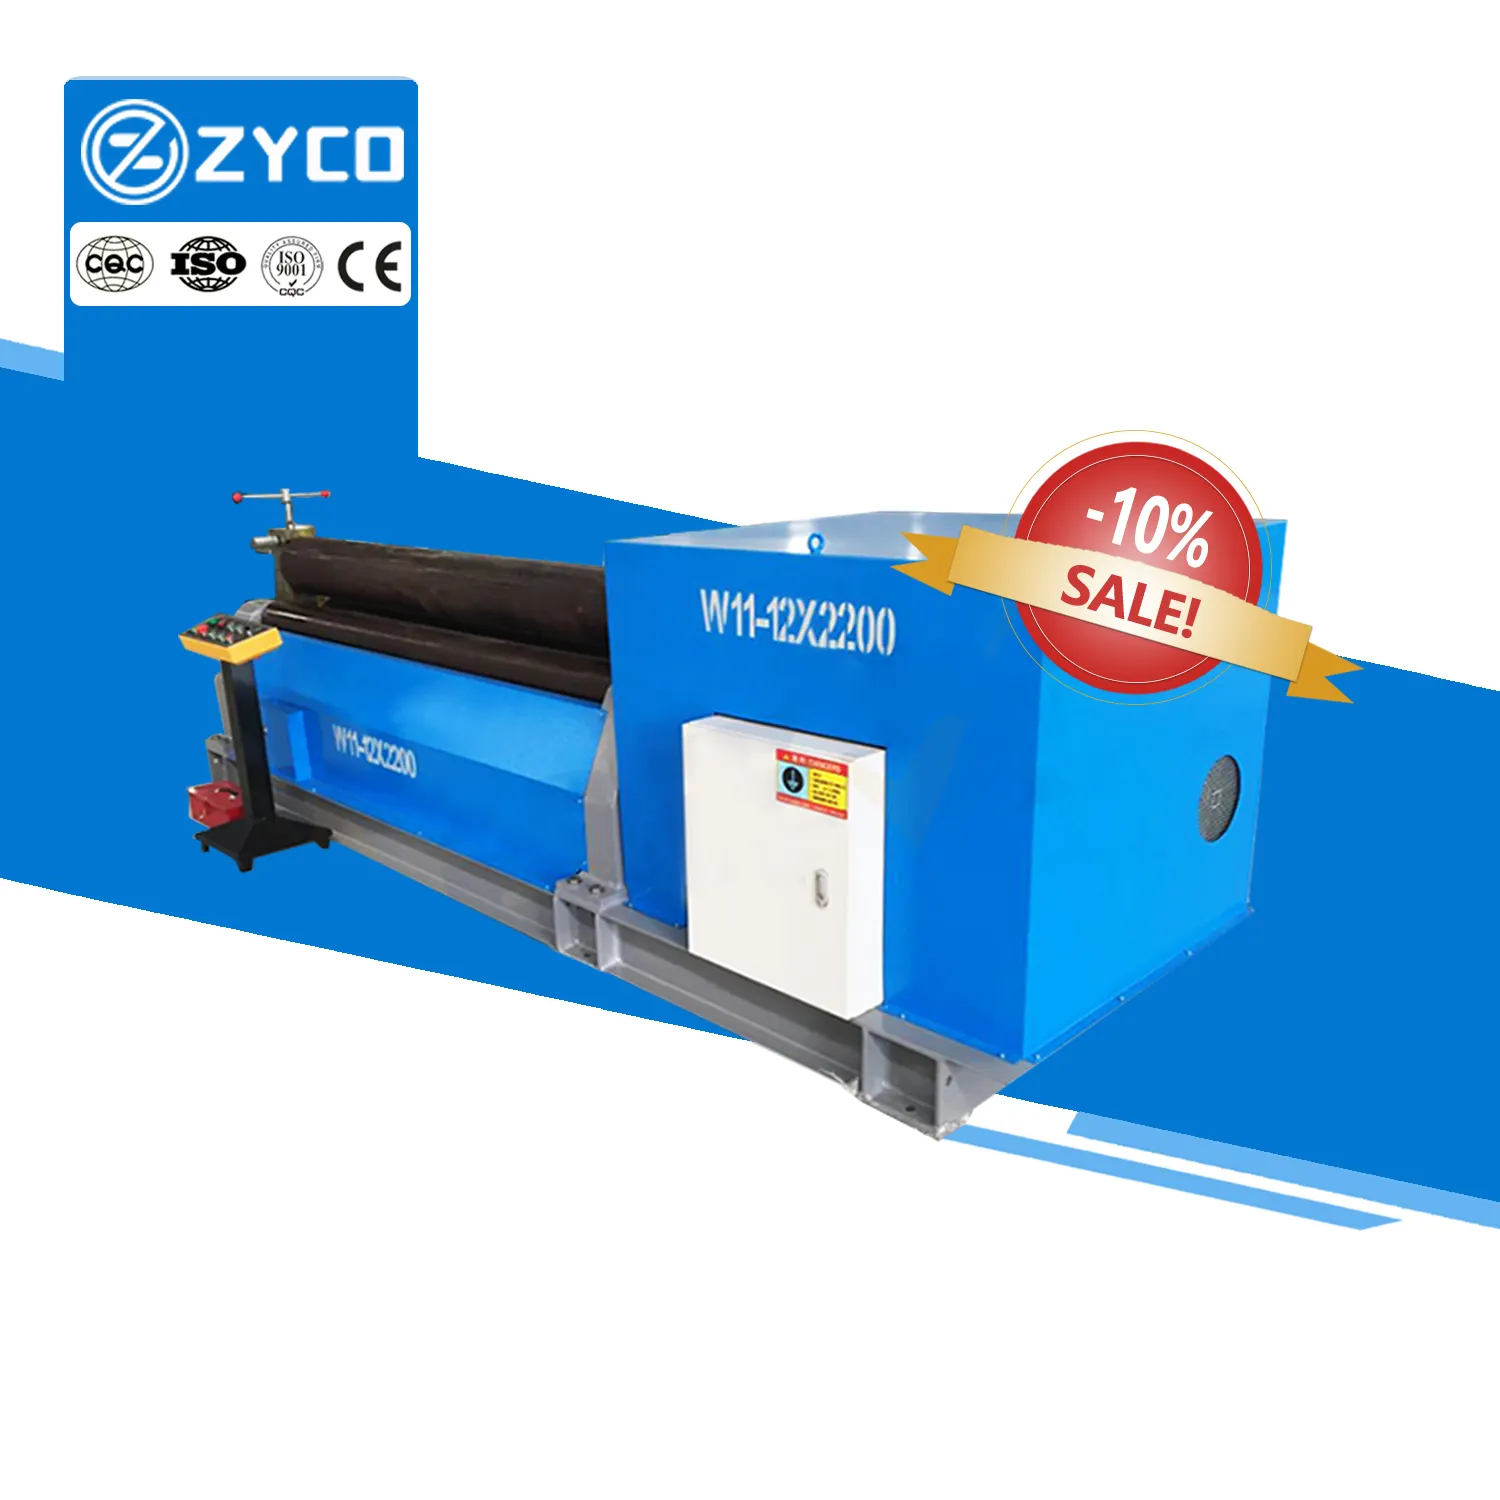 High Quality High Productivity Three-Roller Metal Plate Bending Machine